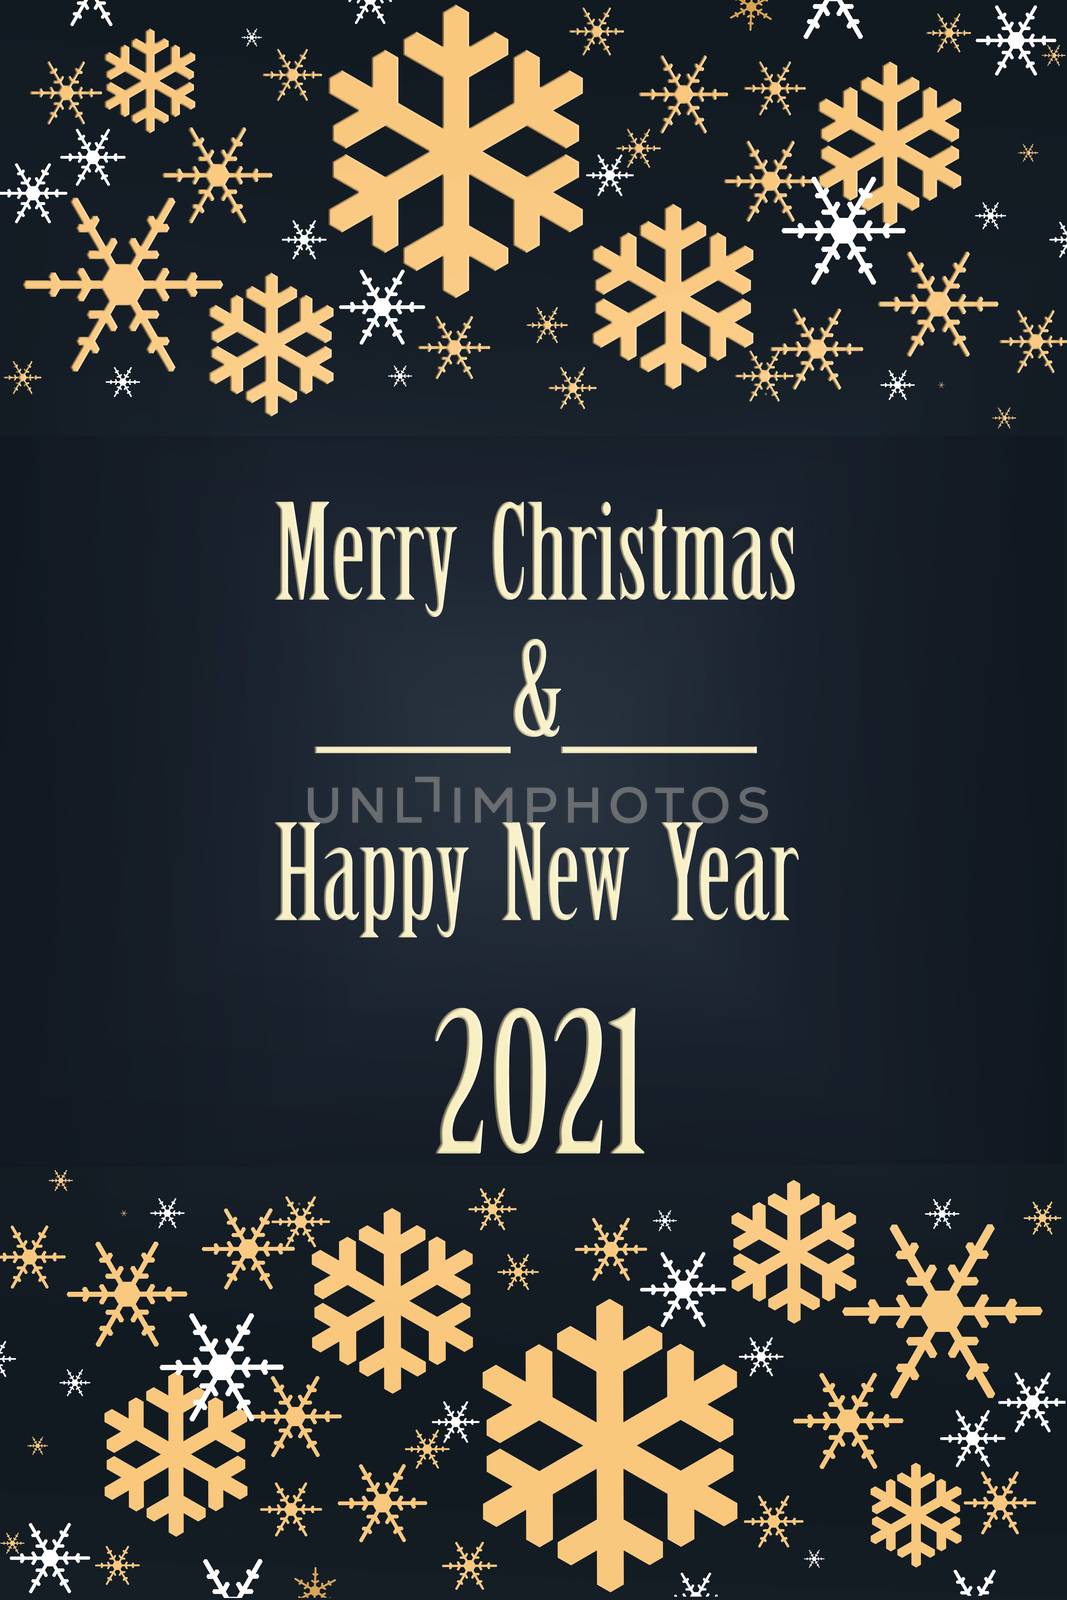 Merry Christmas and 2021 Happy New Year card by NelliPolk